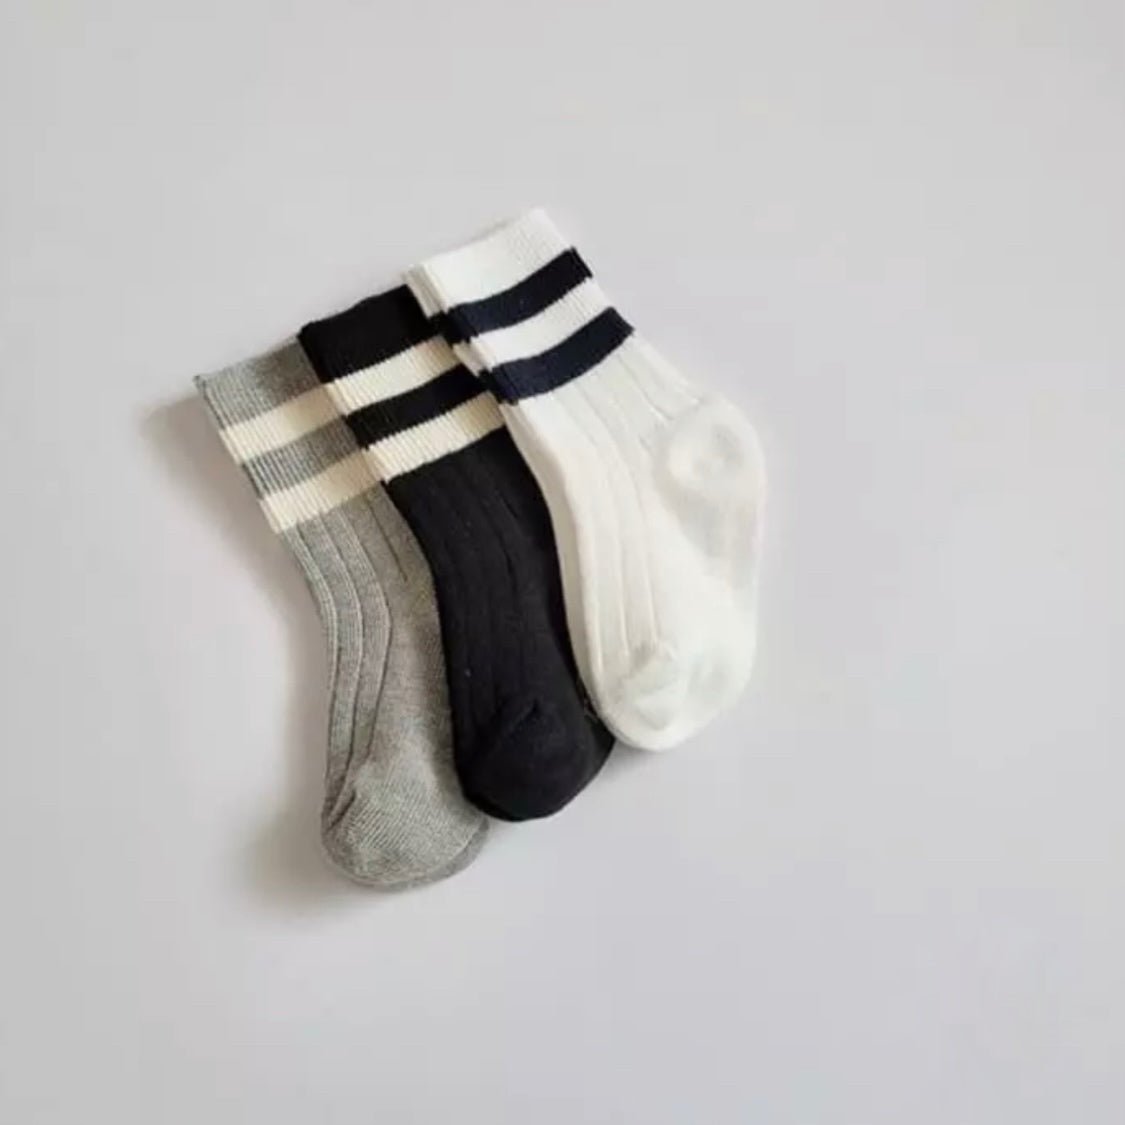 Low Low Socks (3er Set) find Stylish Fashion for Little People- at Little Foxx Concept Store